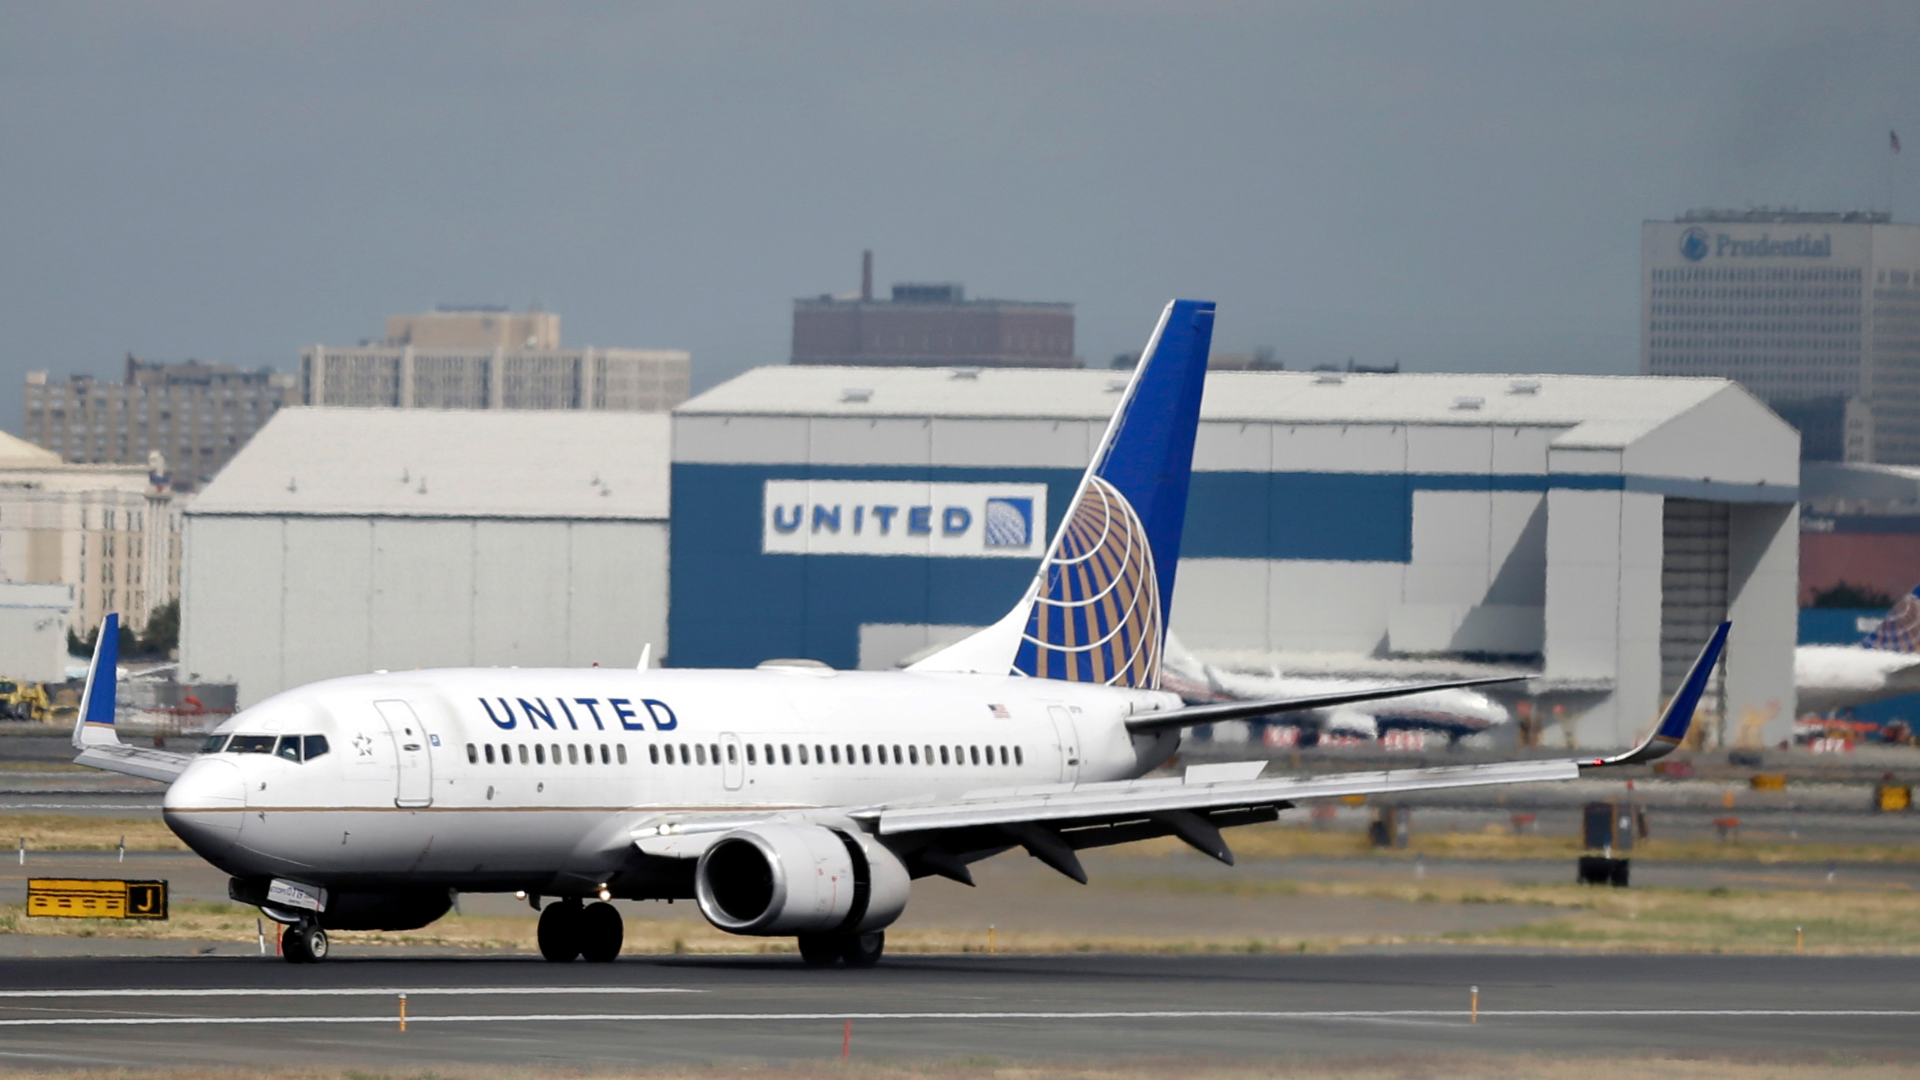 Two girls barred from United flight for wearing leggings - The